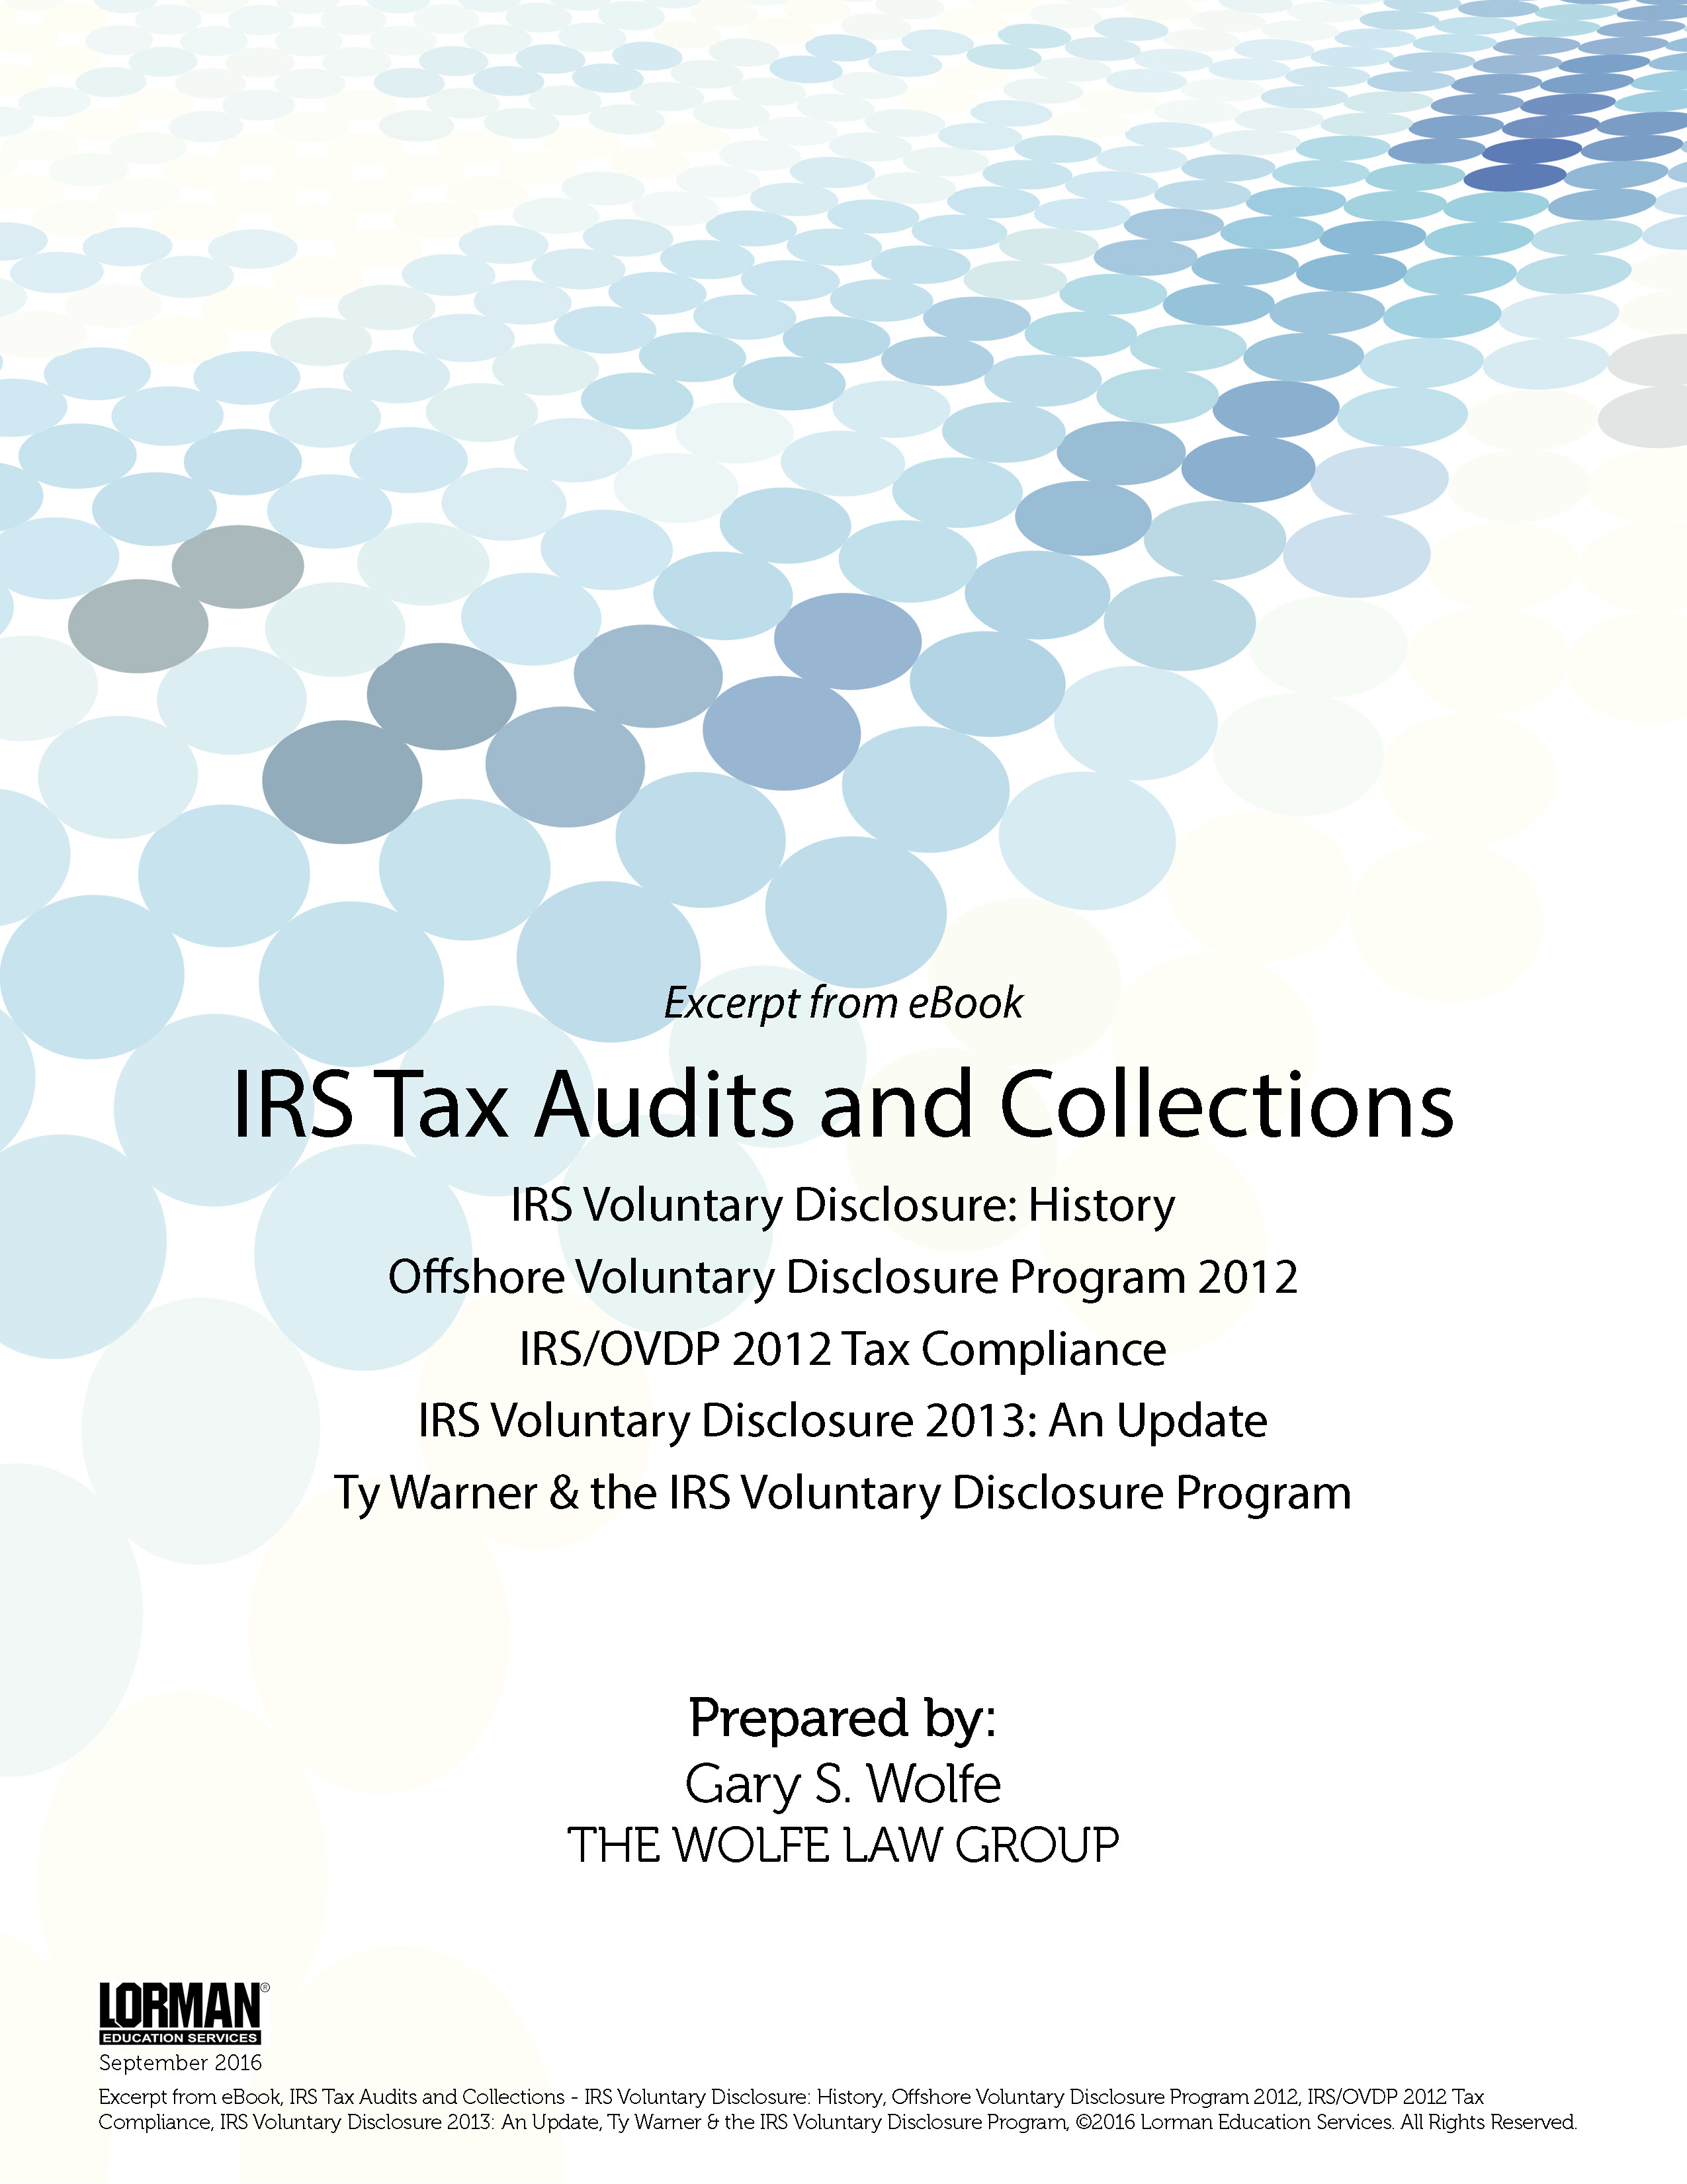 IRS Tax Audits and Collections: IRS Voluntary Disclosure Program 2012 and 2013